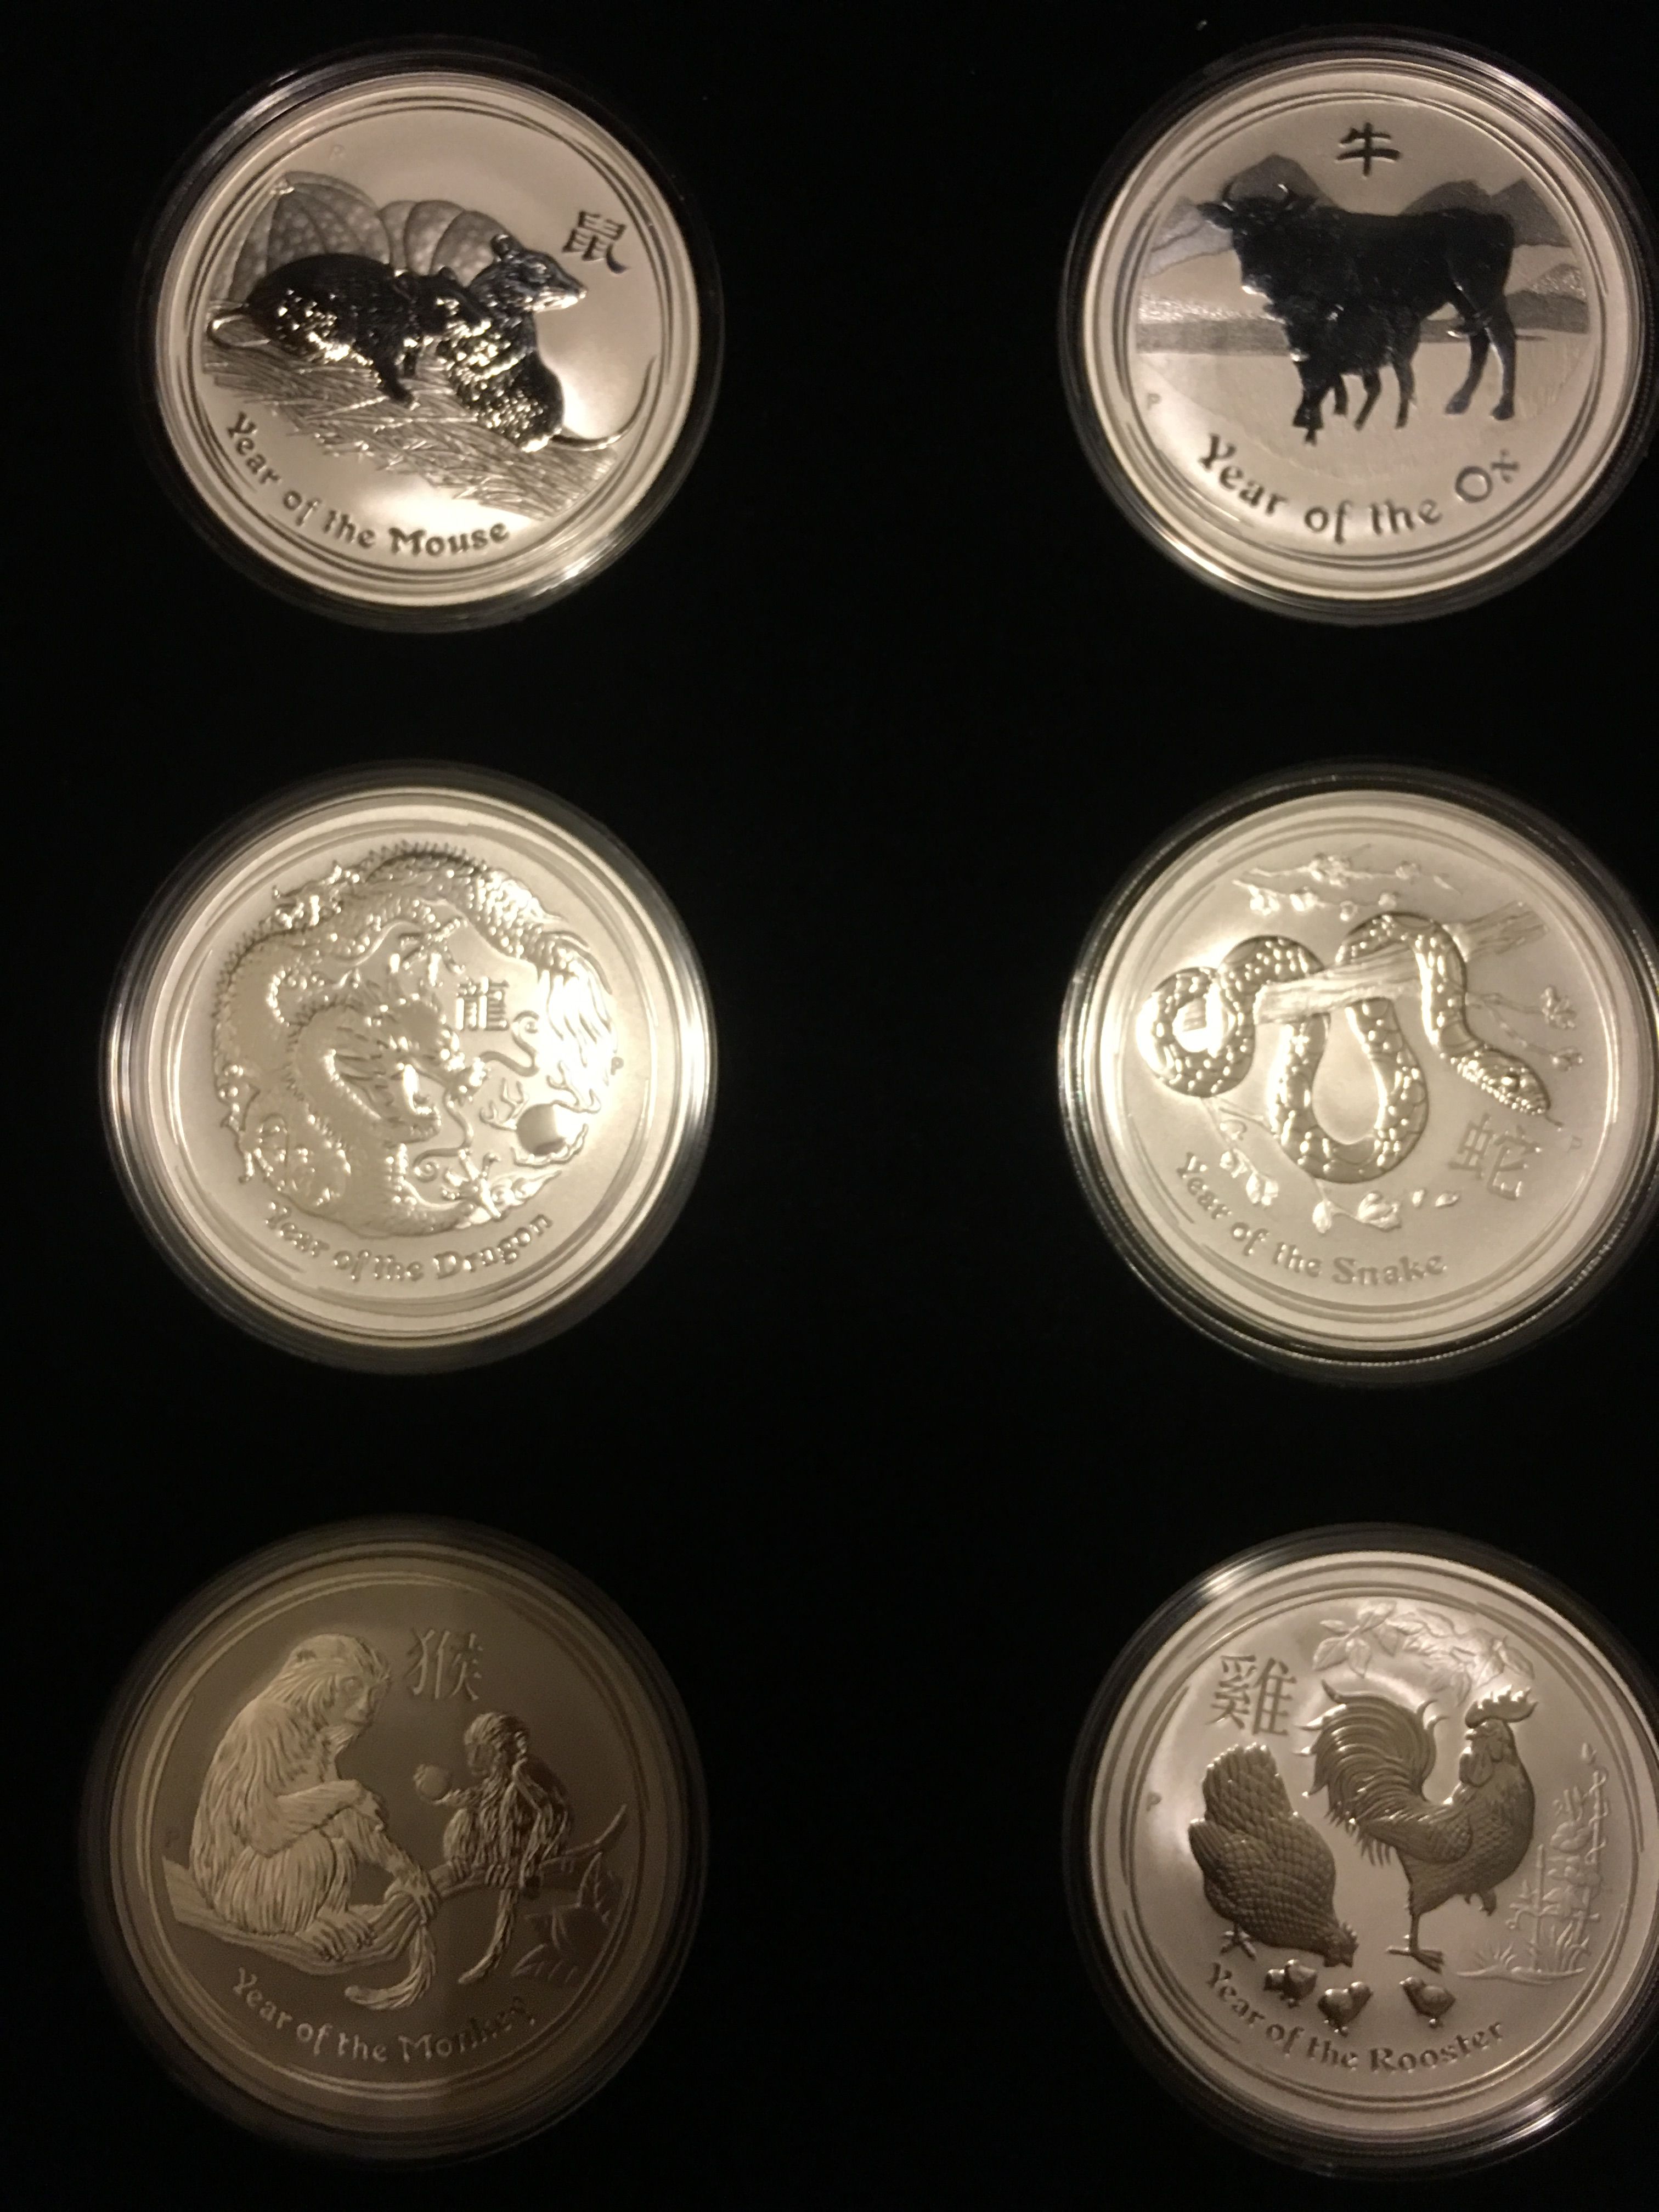 My Silver Coins Collection #7 我的銀幣收藏 #7